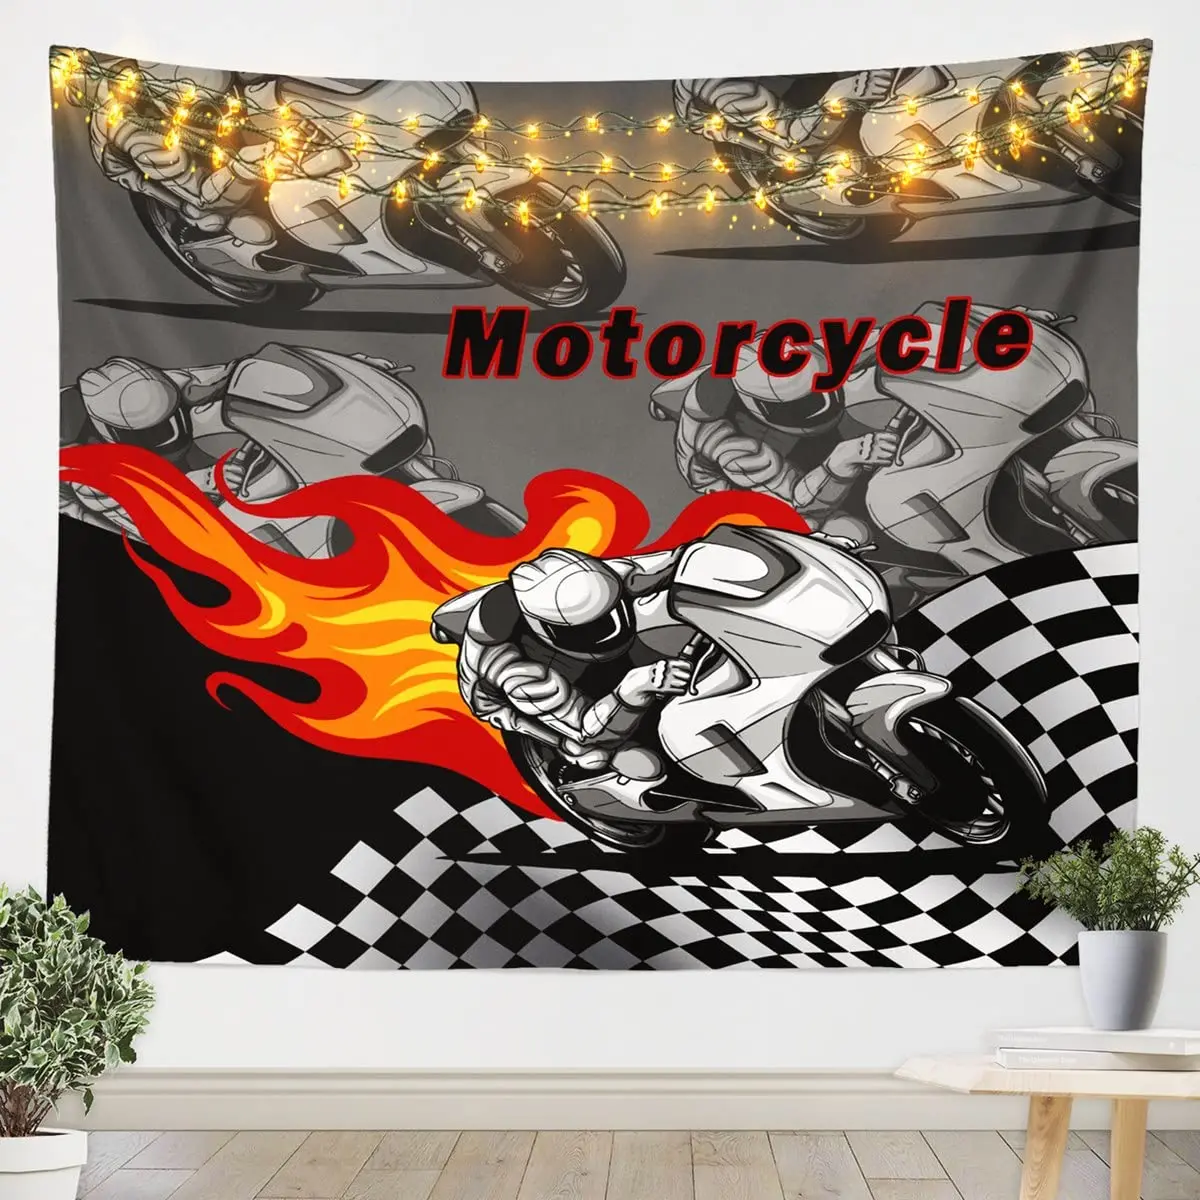 

Motorcycle Rider Tapestry Teens Extreme Sports Theme Tapestry Wall Hanging for Children Boys Wall Blanket Art Bedroom Home Decor